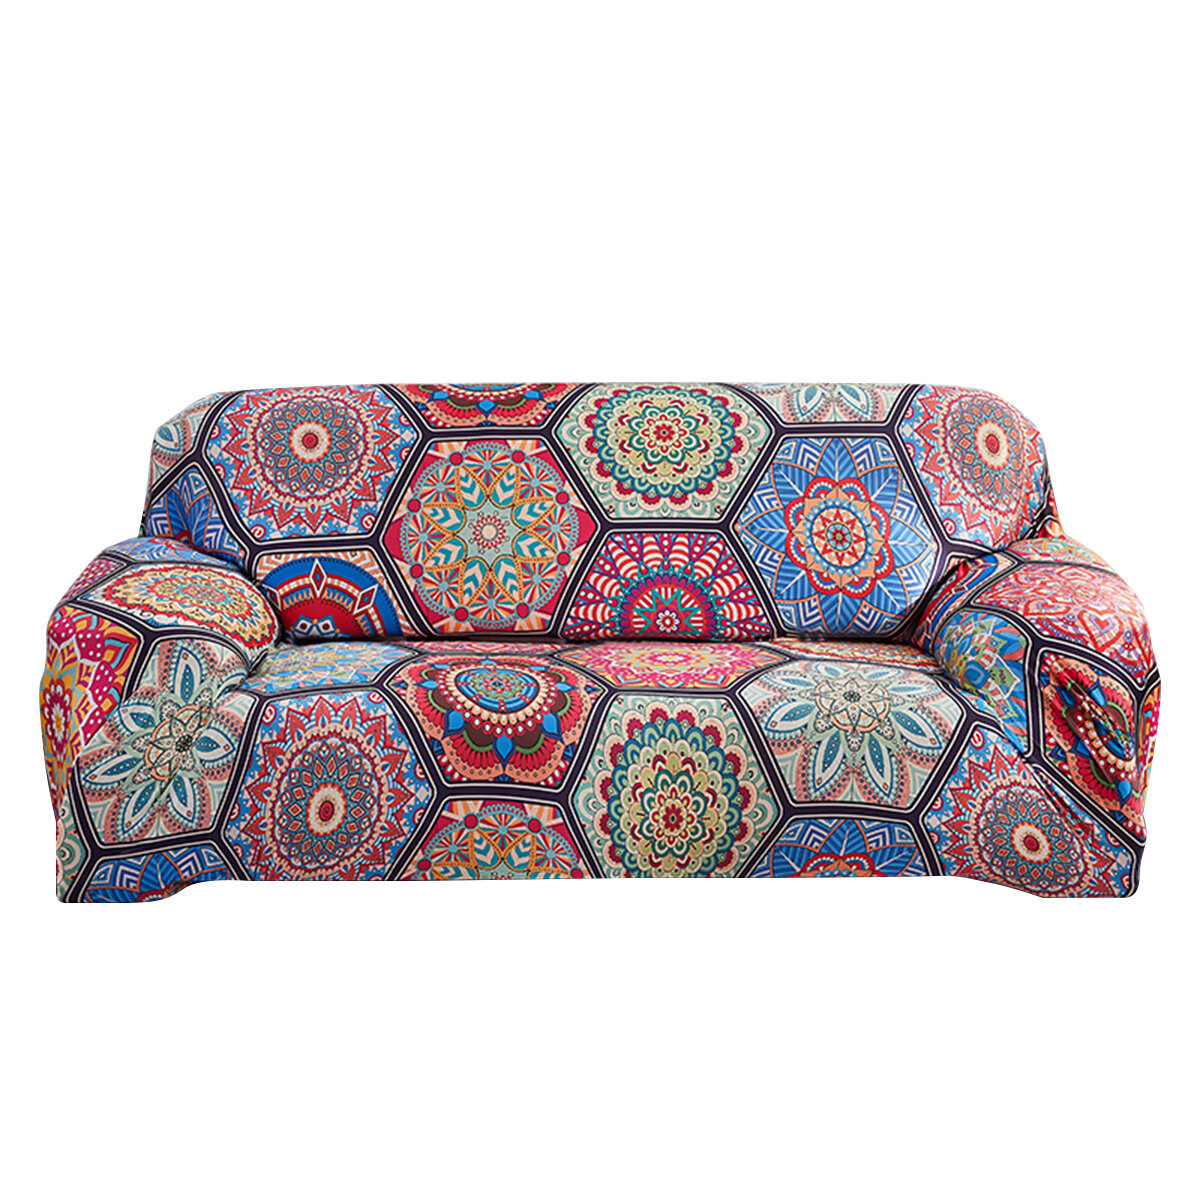 1/2/3/4 Seaters Elastic Sofa Cover Bohemian Digital Printing Chair Seat Protector Stretch Couch Slipcover Home Office Fu